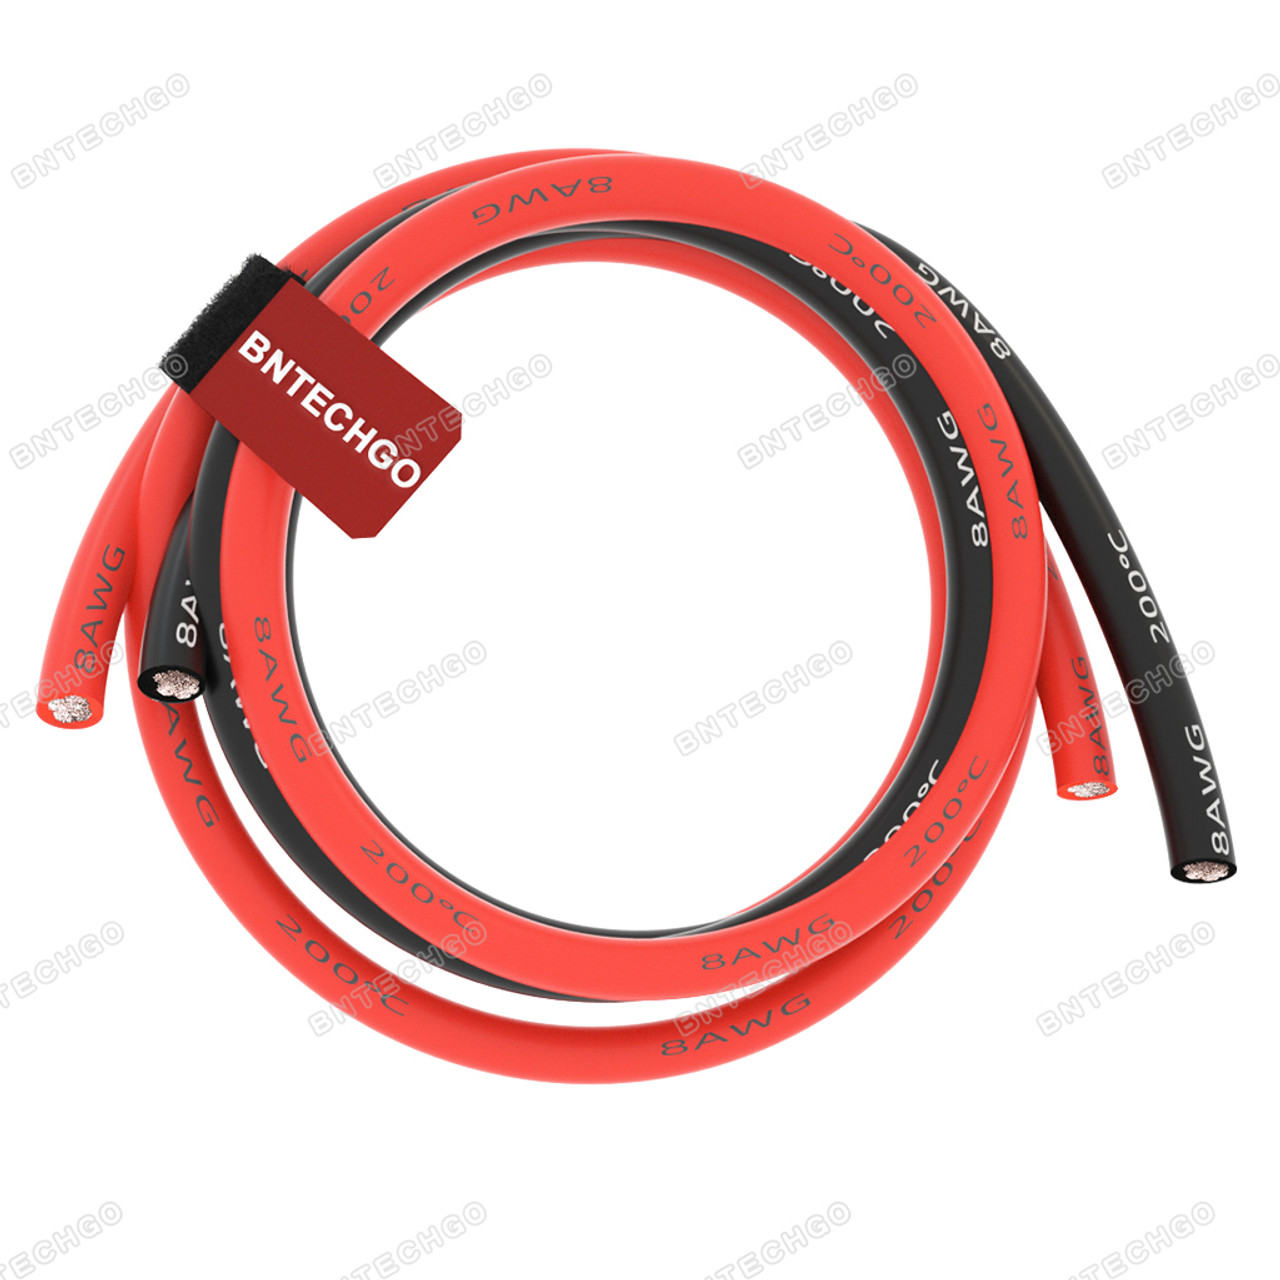 10 Gauge Silicone Wire 10 Feet - 10 AWG Silicone Wire - Flexible Silicone  Wire